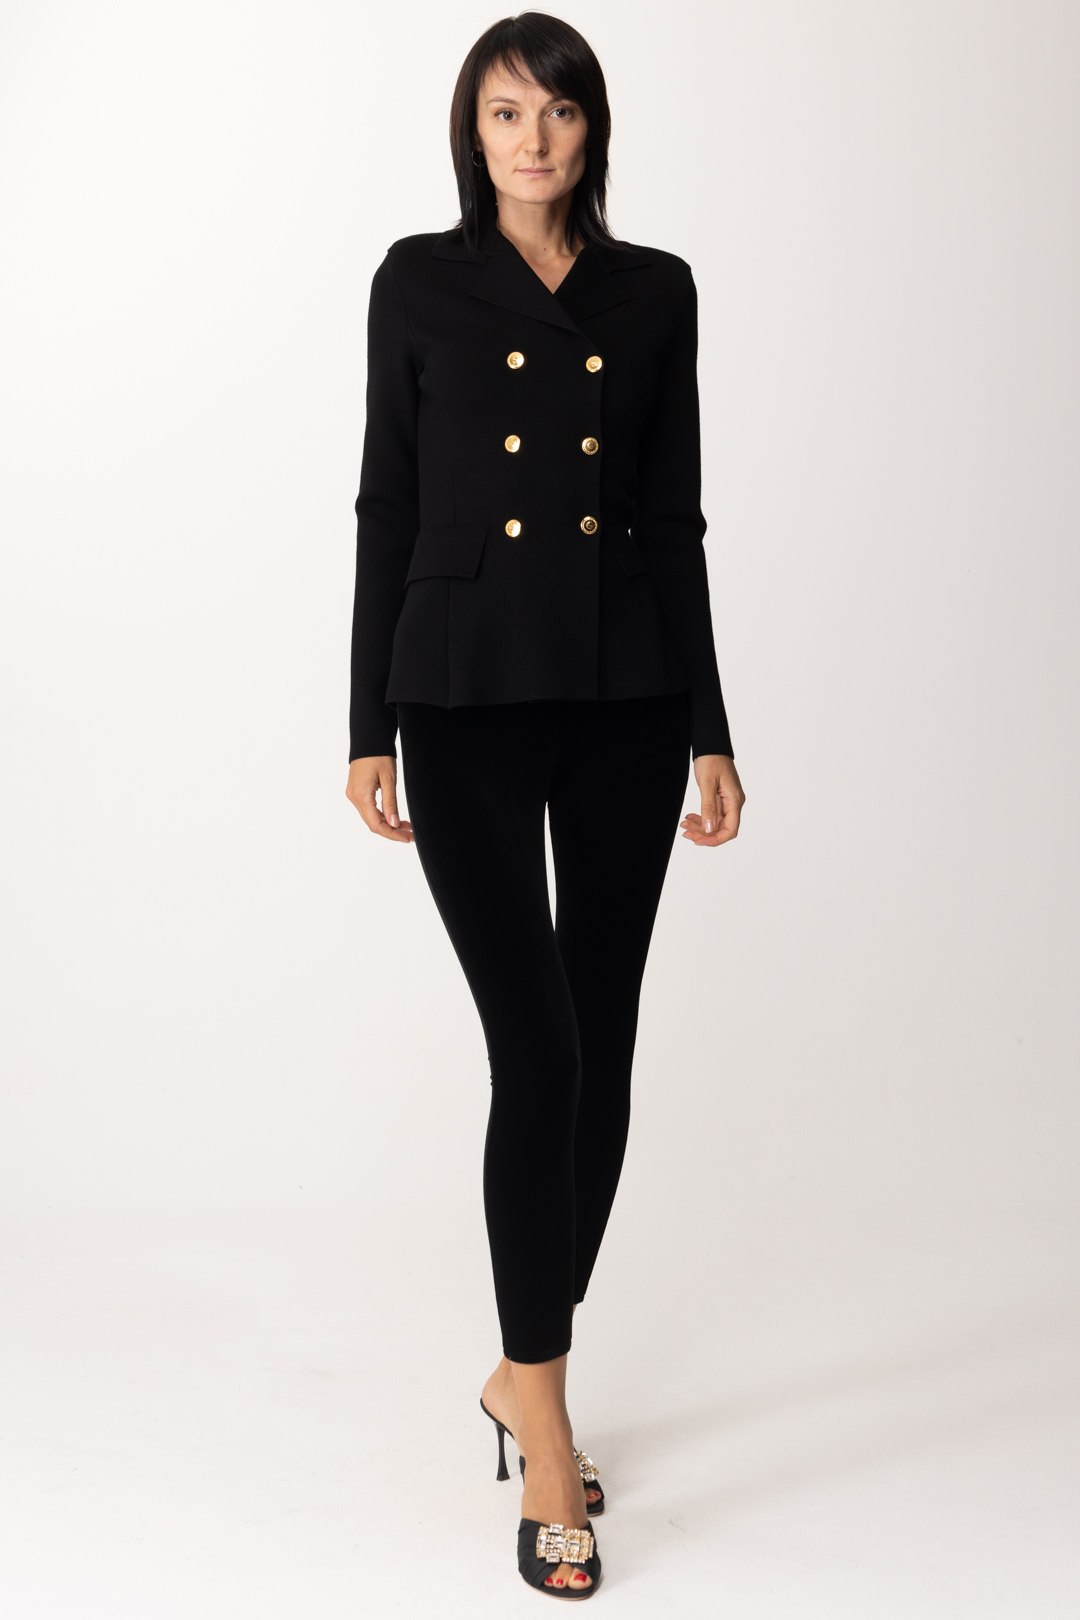 Preview: Elisabetta Franchi Knitted double-breasted jacket Nero